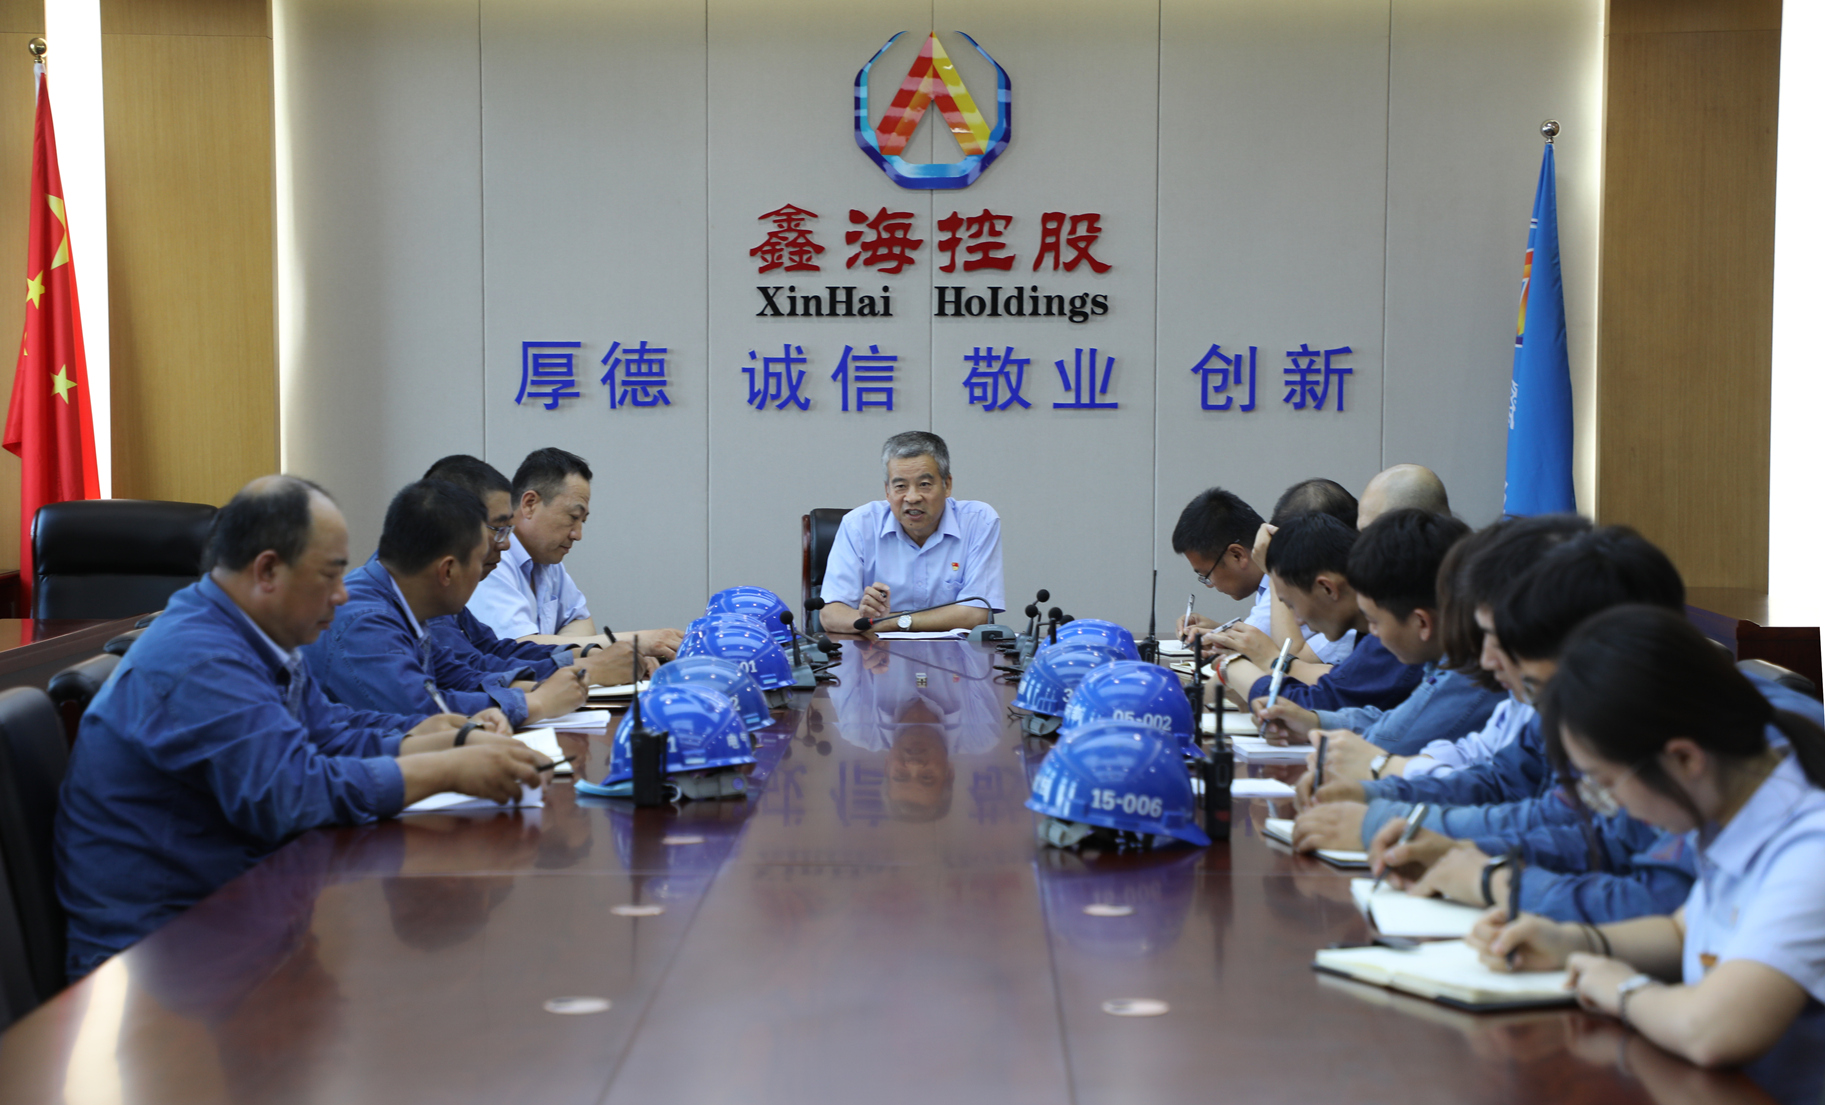 Xinhai Youth League Committee carried out activities to create youth safety production demonstration posts